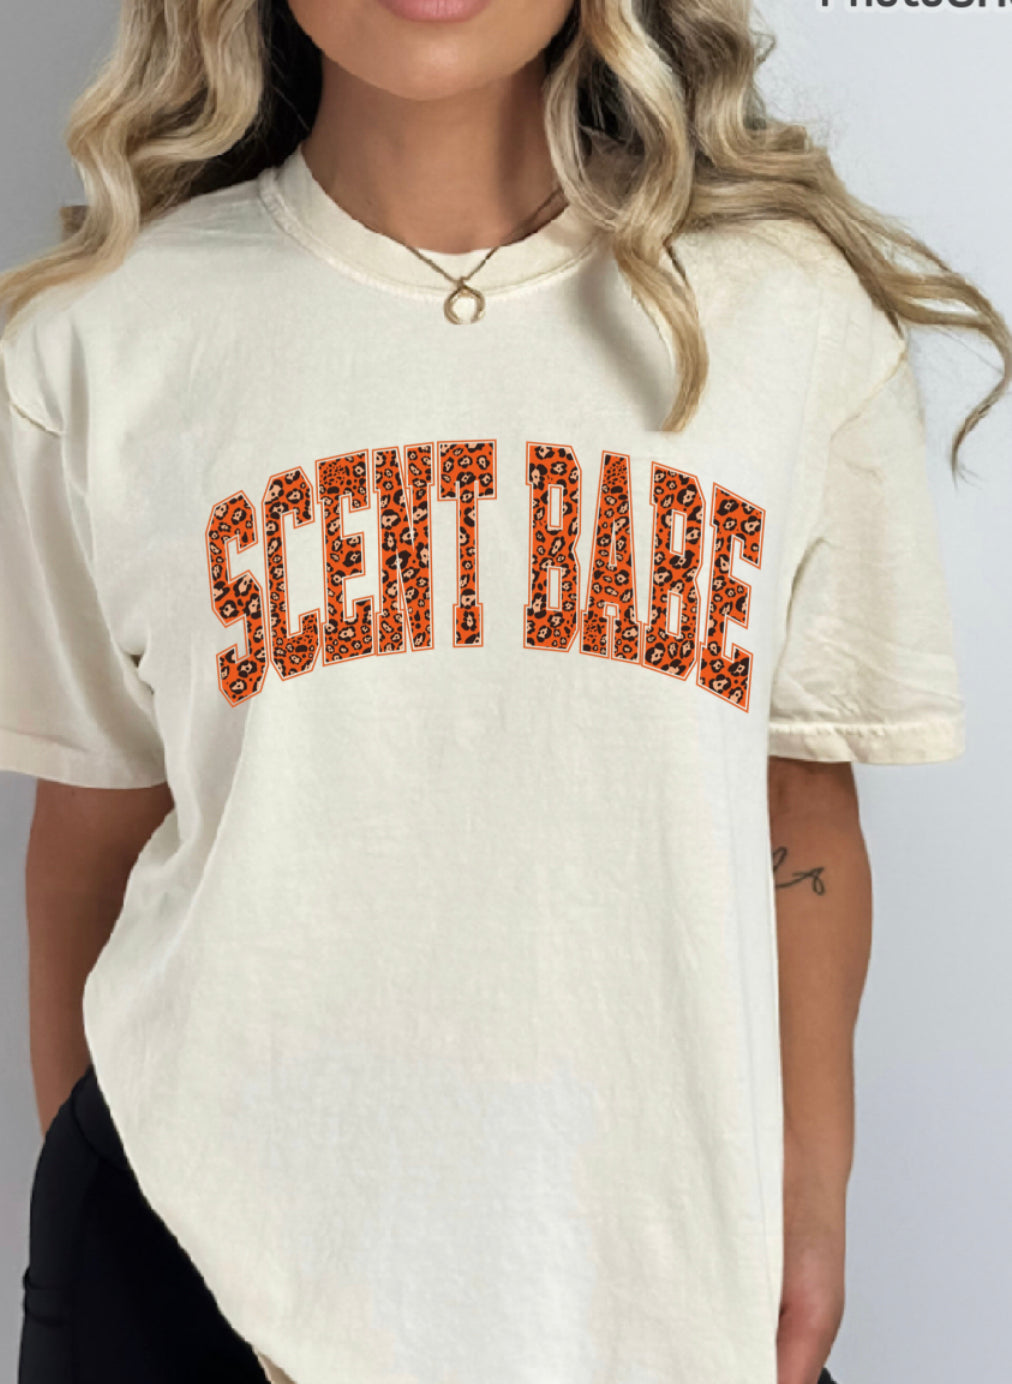 Scent babe fall leopard